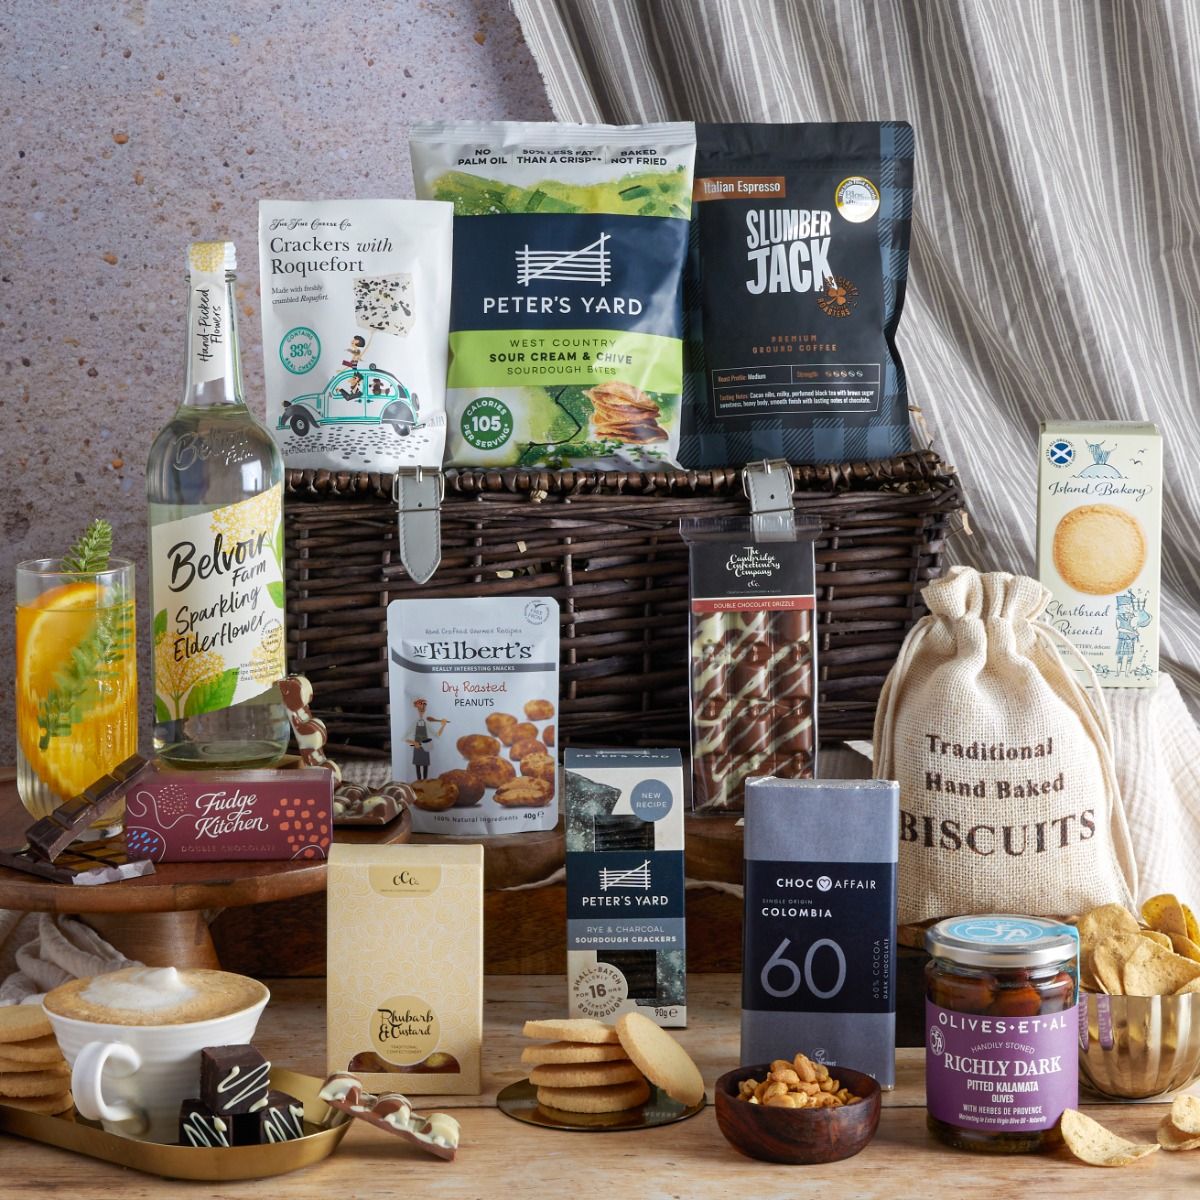 Premium Alcohol Free Hamper with contents on display